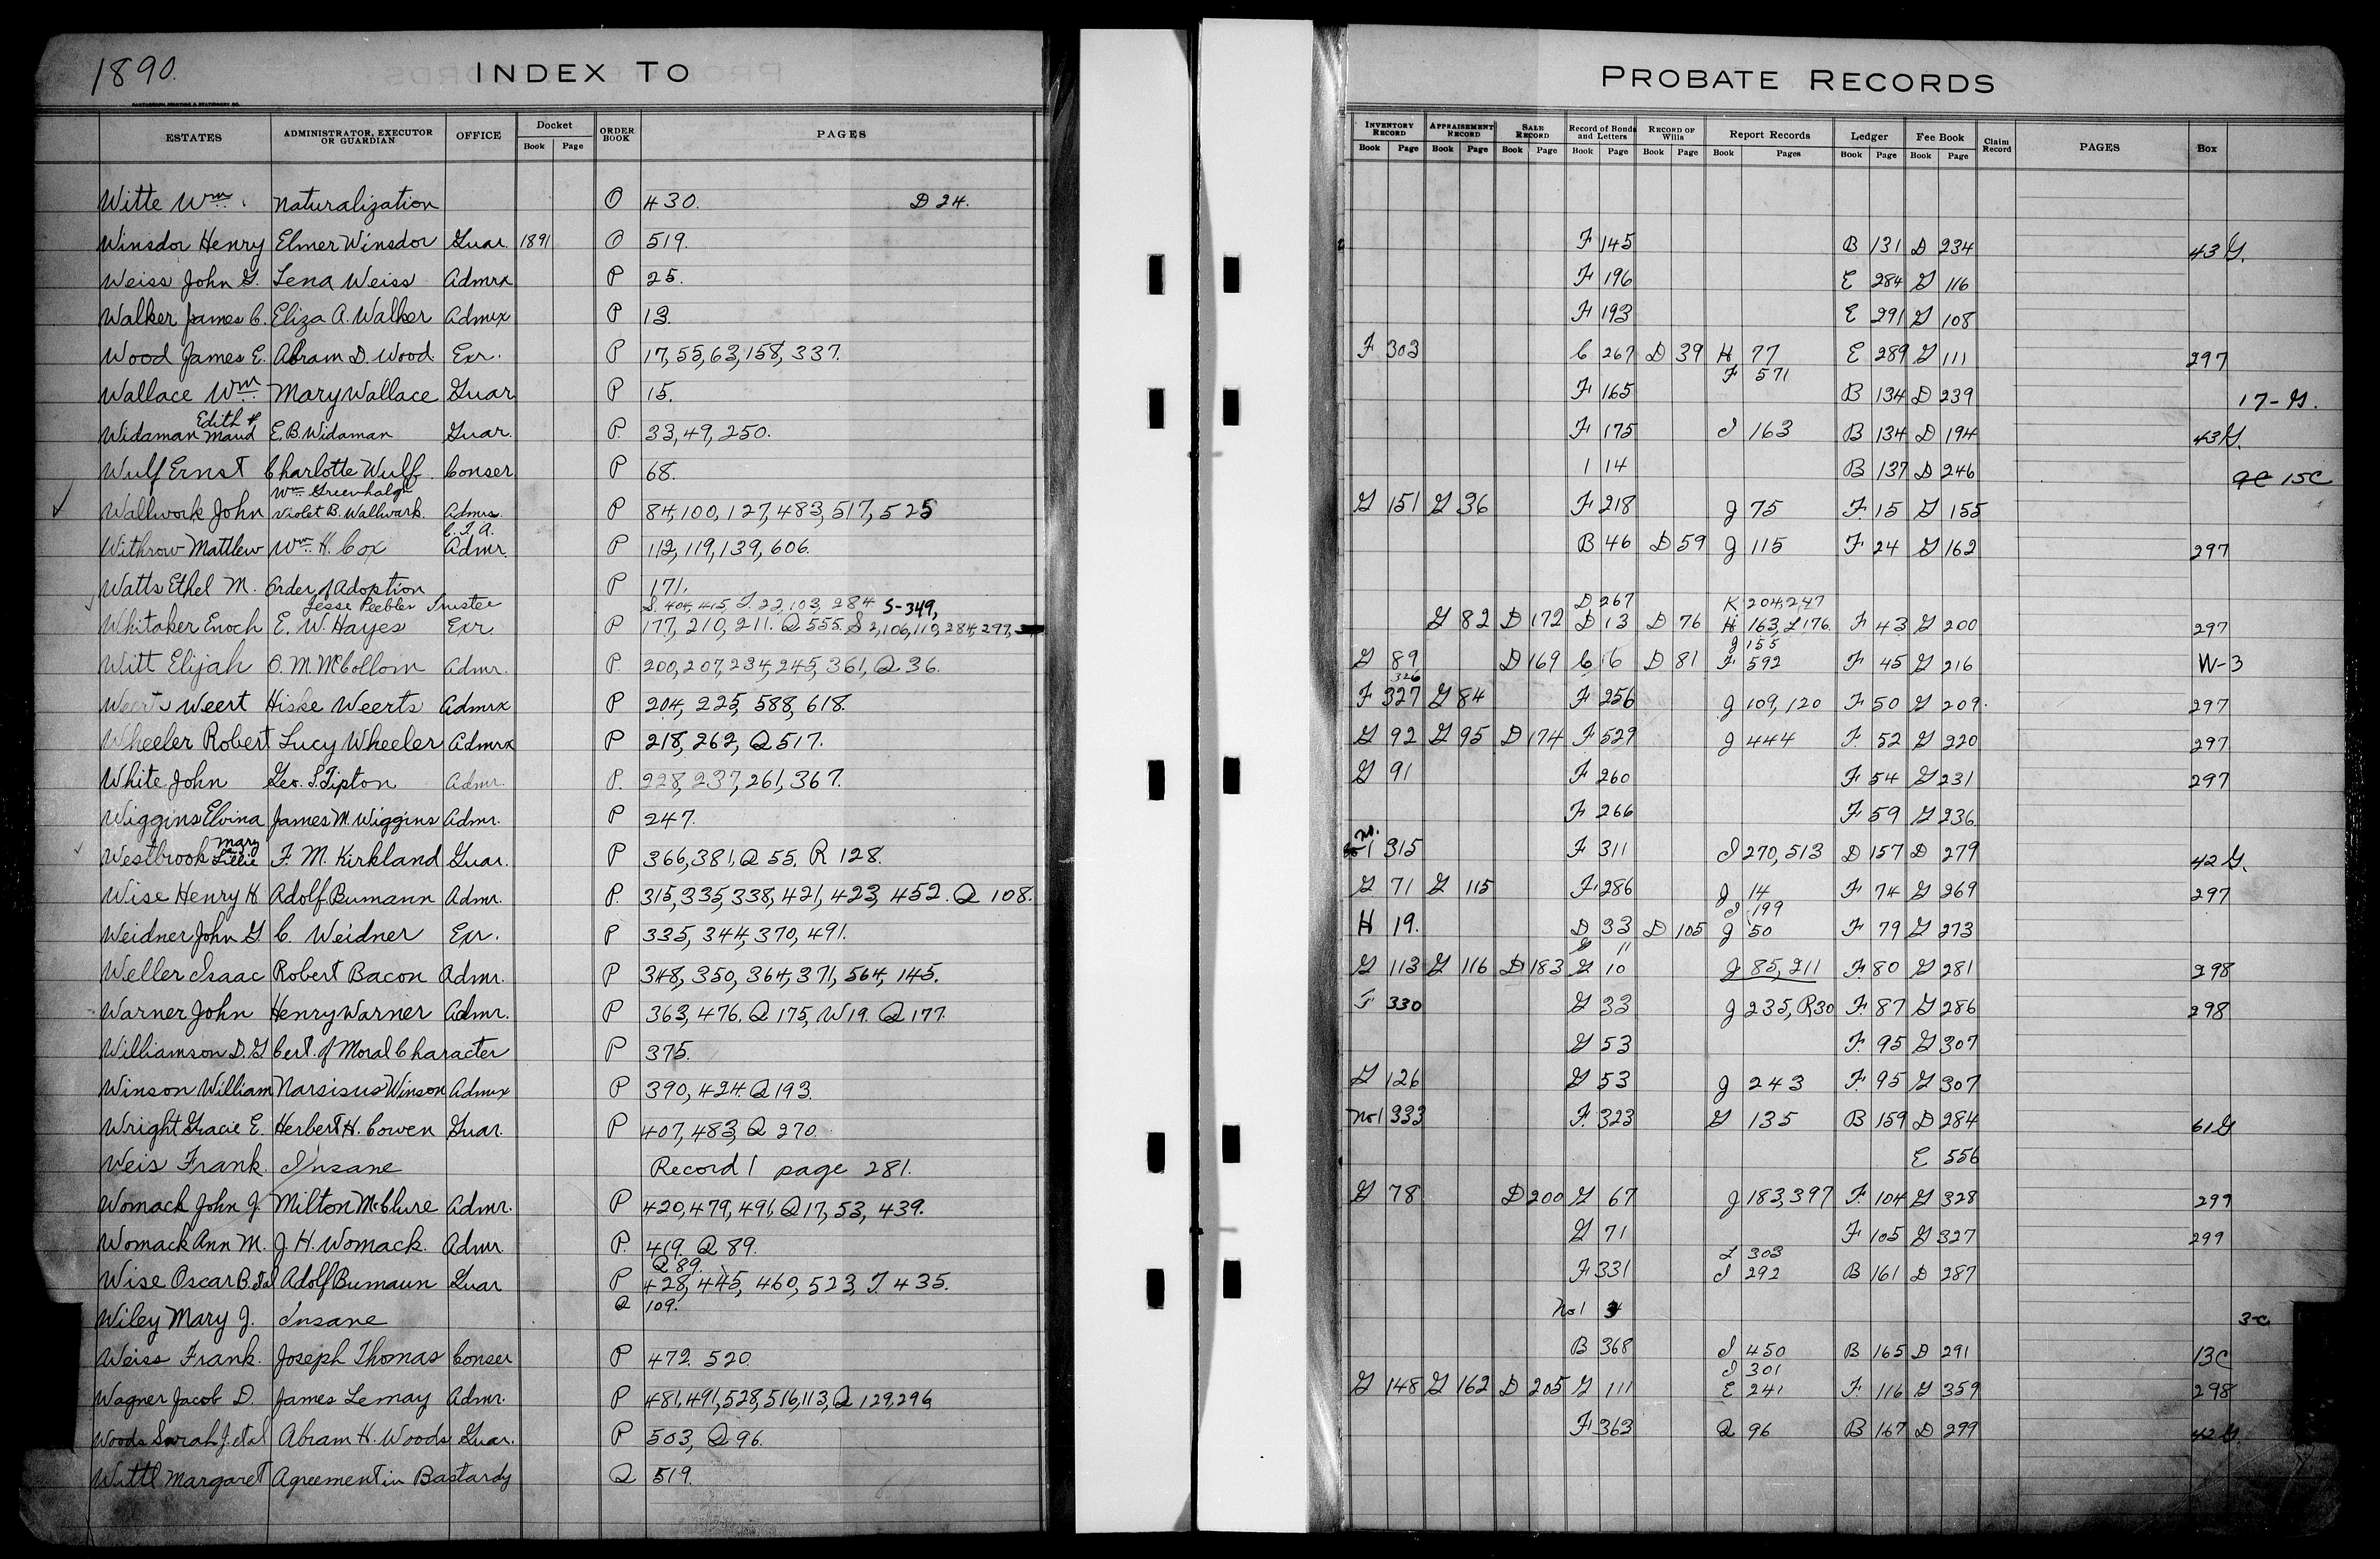 James C. Walker, probate index, after 1888 (probably 1891), Macoupin County, Illinois